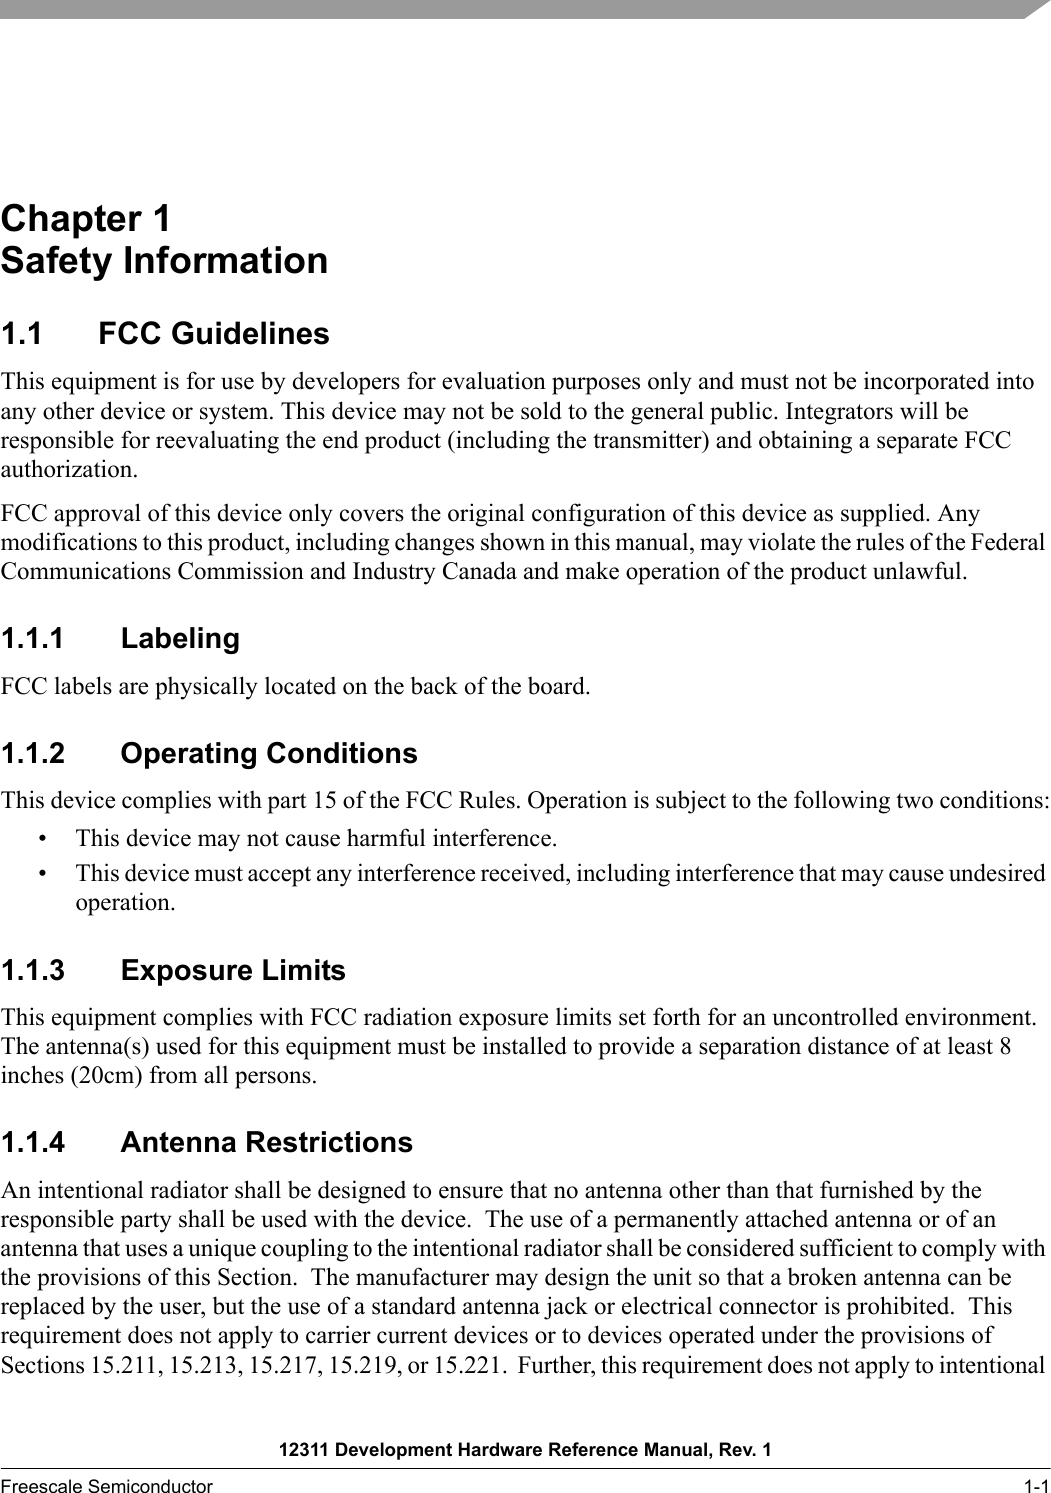 12311 Development Hardware Reference Manual, Rev. 1Freescale Semiconductor 1-1Chapter 1  Safety Information1.1 FCC GuidelinesThis equipment is for use by developers for evaluation purposes only and must not be incorporated into any other device or system. This device may not be sold to the general public. Integrators will be responsible for reevaluating the end product (including the transmitter) and obtaining a separate FCC authorization.FCC approval of this device only covers the original configuration of this device as supplied. Any modifications to this product, including changes shown in this manual, may violate the rules of the Federal Communications Commission and Industry Canada and make operation of the product unlawful.1.1.1 LabelingFCC labels are physically located on the back of the board.1.1.2 Operating ConditionsThis device complies with part 15 of the FCC Rules. Operation is subject to the following two conditions:• This device may not cause harmful interference.• This device must accept any interference received, including interference that may cause undesired operation.1.1.3 Exposure LimitsThis equipment complies with FCC radiation exposure limits set forth for an uncontrolled environment. The antenna(s) used for this equipment must be installed to provide a separation distance of at least 8 inches (20cm) from all persons.1.1.4 Antenna RestrictionsAn intentional radiator shall be designed to ensure that no antenna other than that furnished by the responsible party shall be used with the device.  The use of a permanently attached antenna or of an antenna that uses a unique coupling to the intentional radiator shall be considered sufficient to comply with the provisions of this Section.  The manufacturer may design the unit so that a broken antenna can be replaced by the user, but the use of a standard antenna jack or electrical connector is prohibited.  This requirement does not apply to carrier current devices or to devices operated under the provisions of Sections 15.211, 15.213, 15.217, 15.219, or 15.221.  Further, this requirement does not apply to intentional 